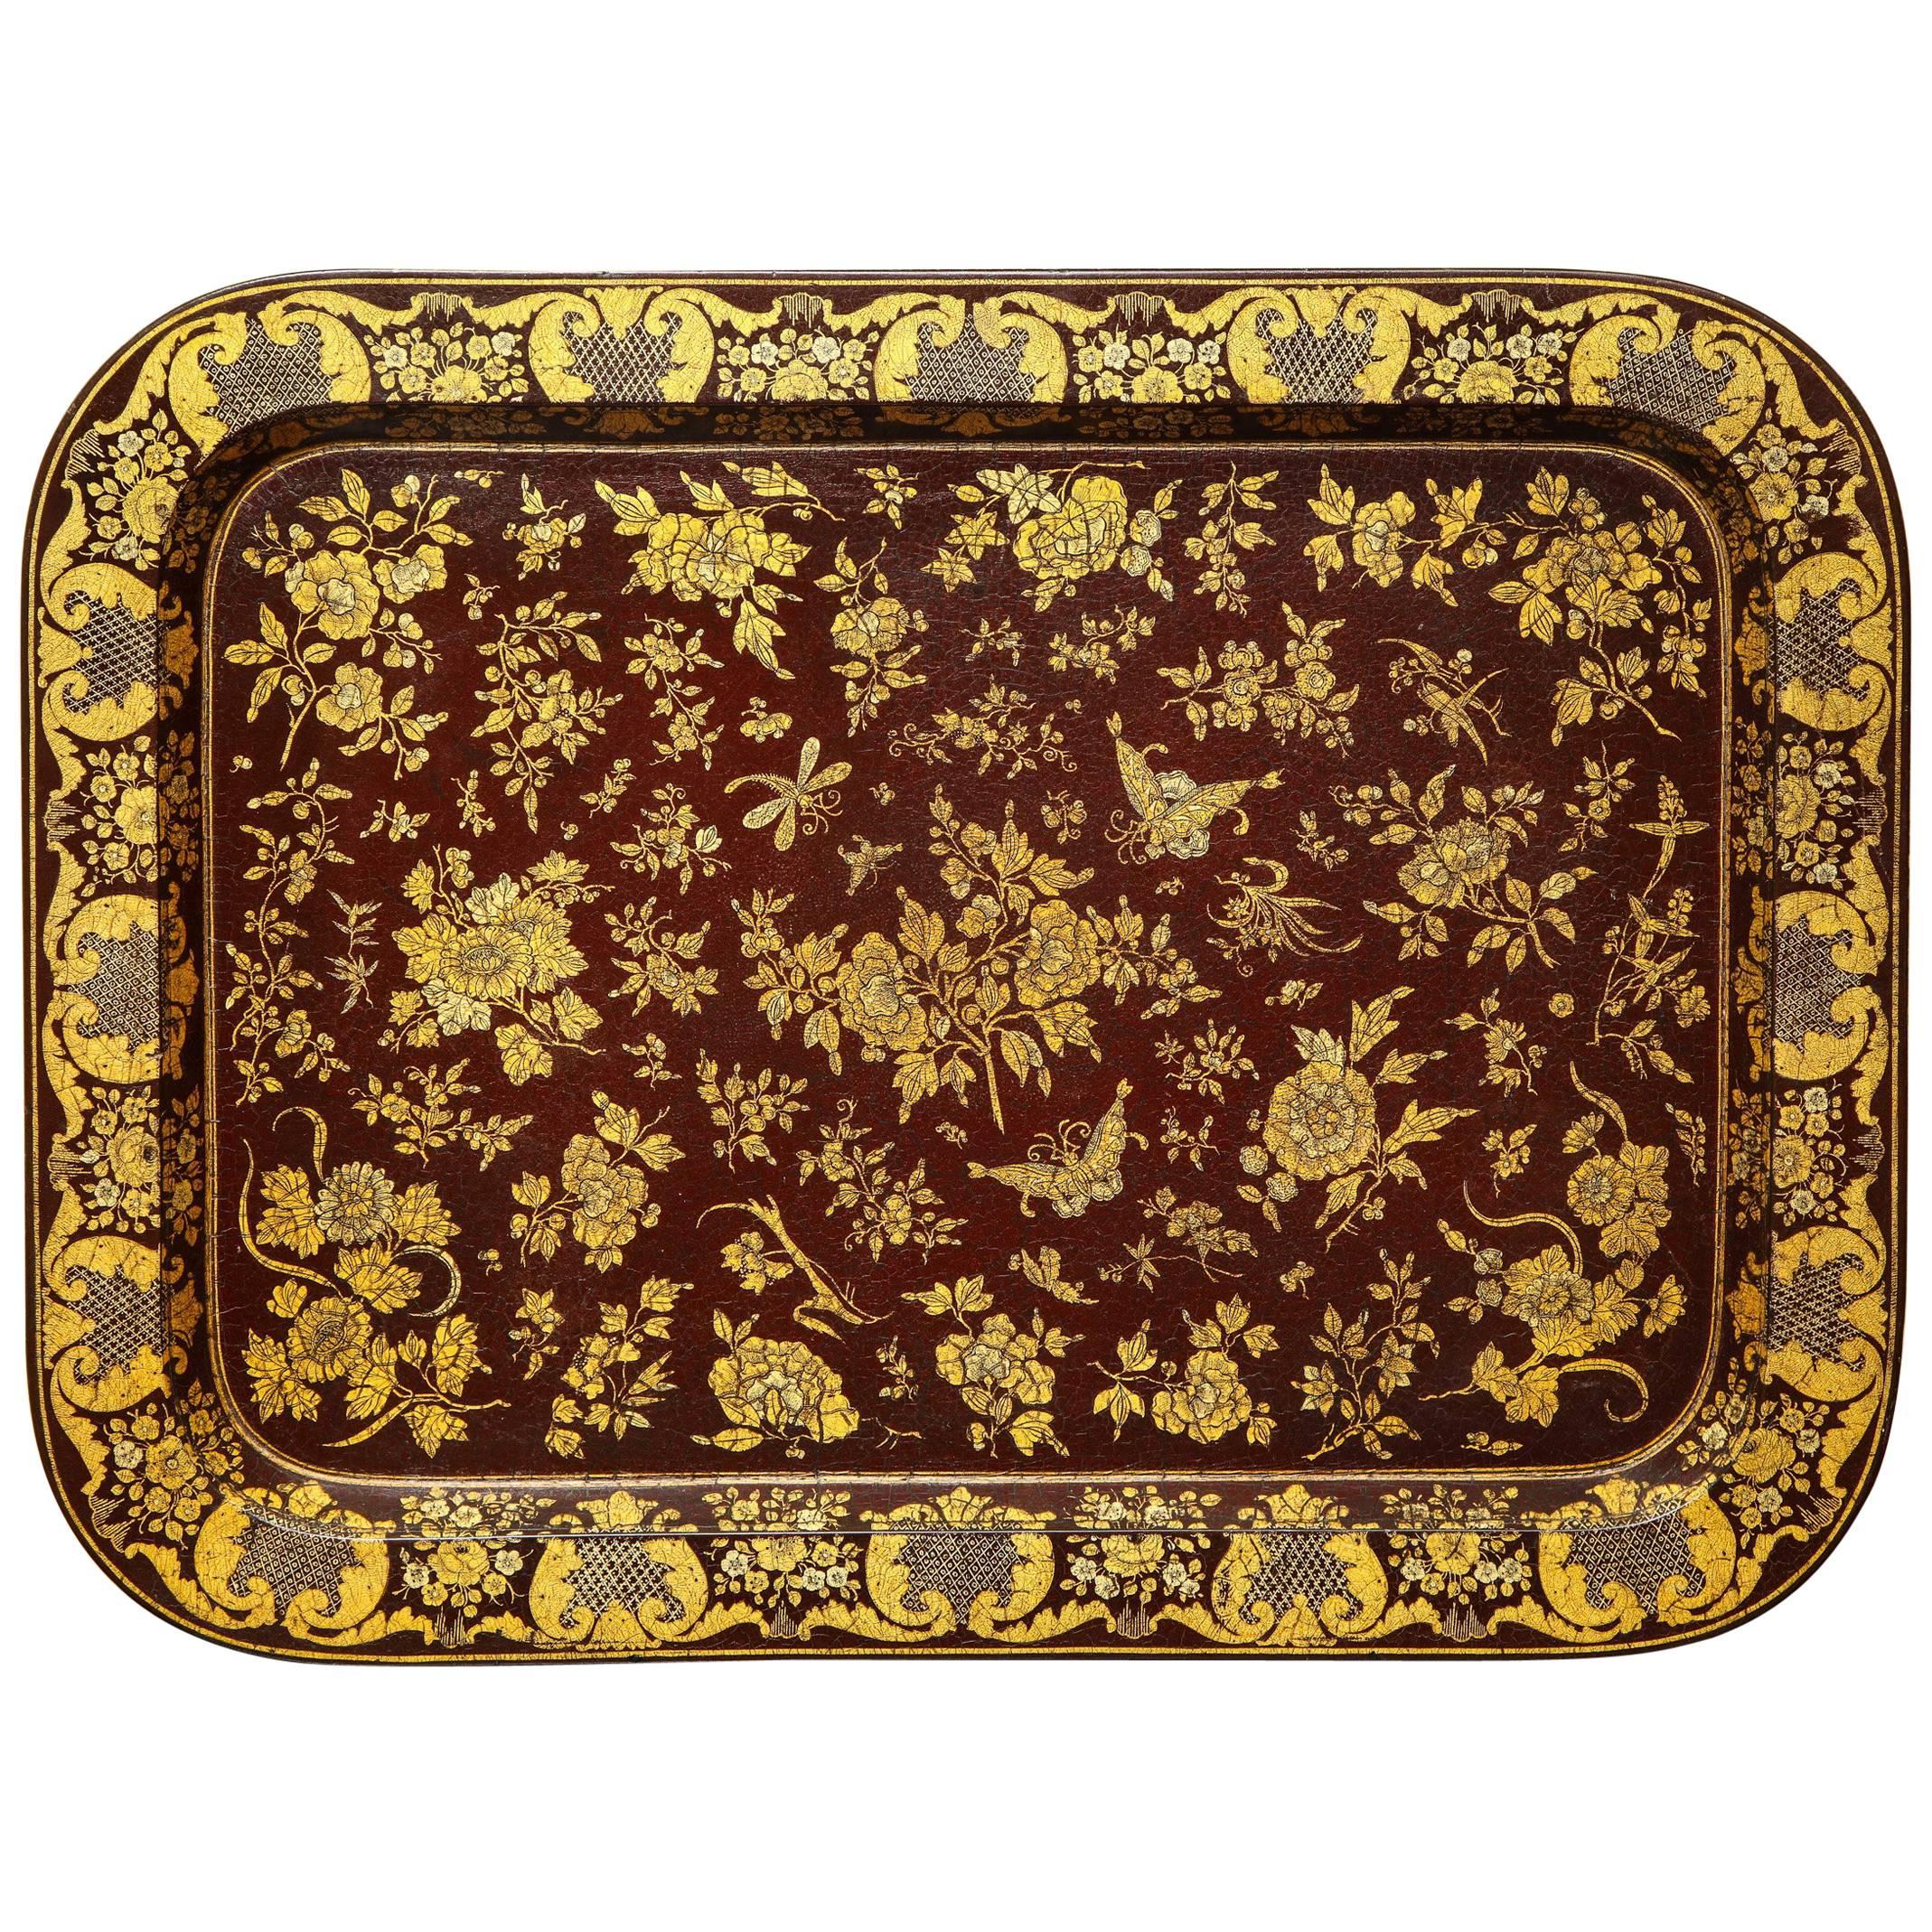 Large Regency Wine Colored Papier Mâché Rectangular Tray, circa 1830 In Stock For Sale